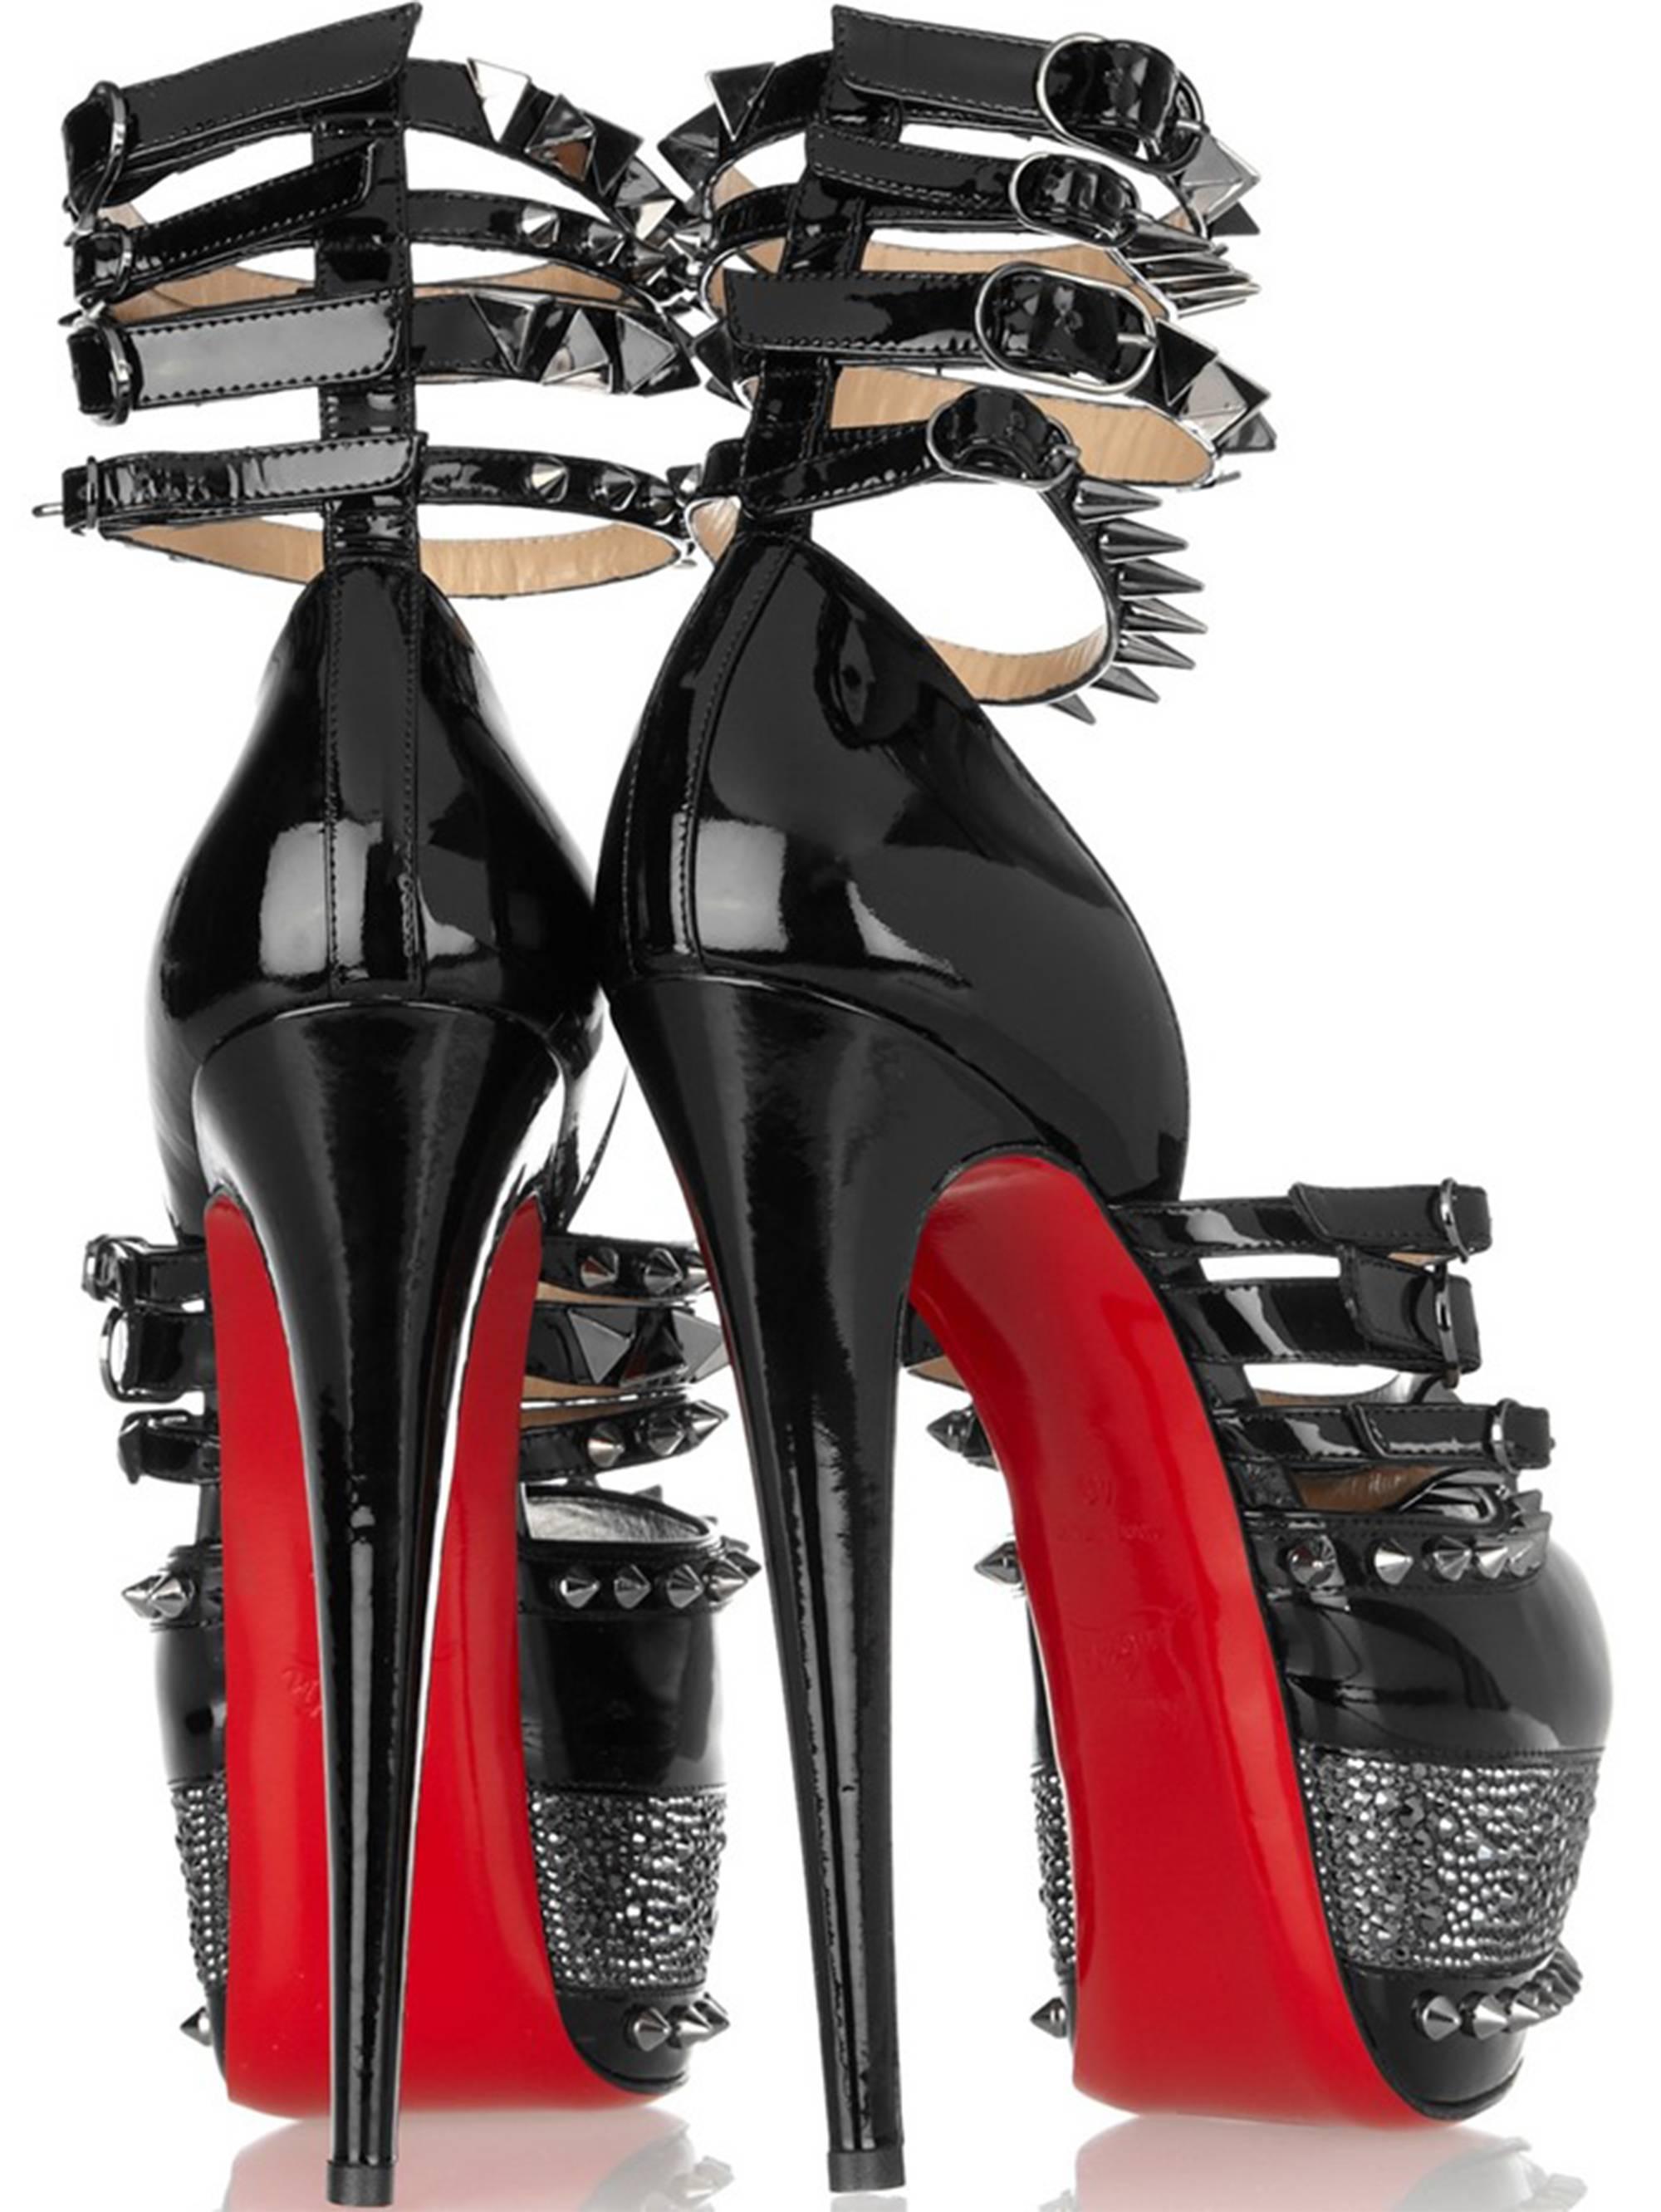 Christian Louboutin 20th Anniversary Isolde black patent Platforms.
Year 2012 marked Christian Louboutin’s 20th year revolutionizing the footwear industry, and to celebrate, Louboutin has just released a capsule collection of shoes that recall some